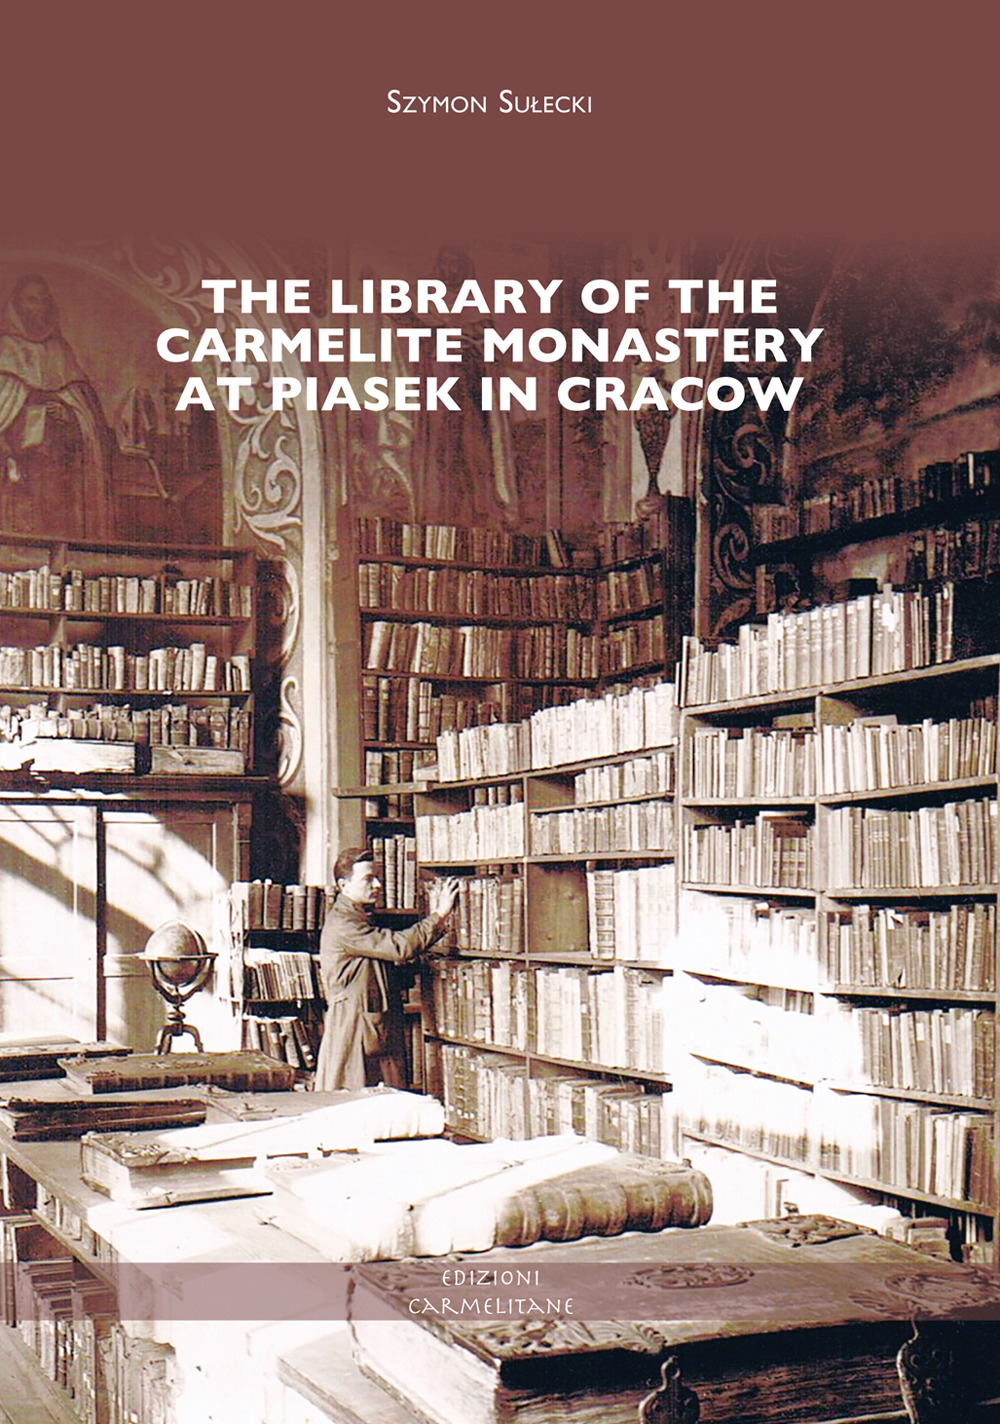 The library of the Carmelite monastery at Piasek in Cracow